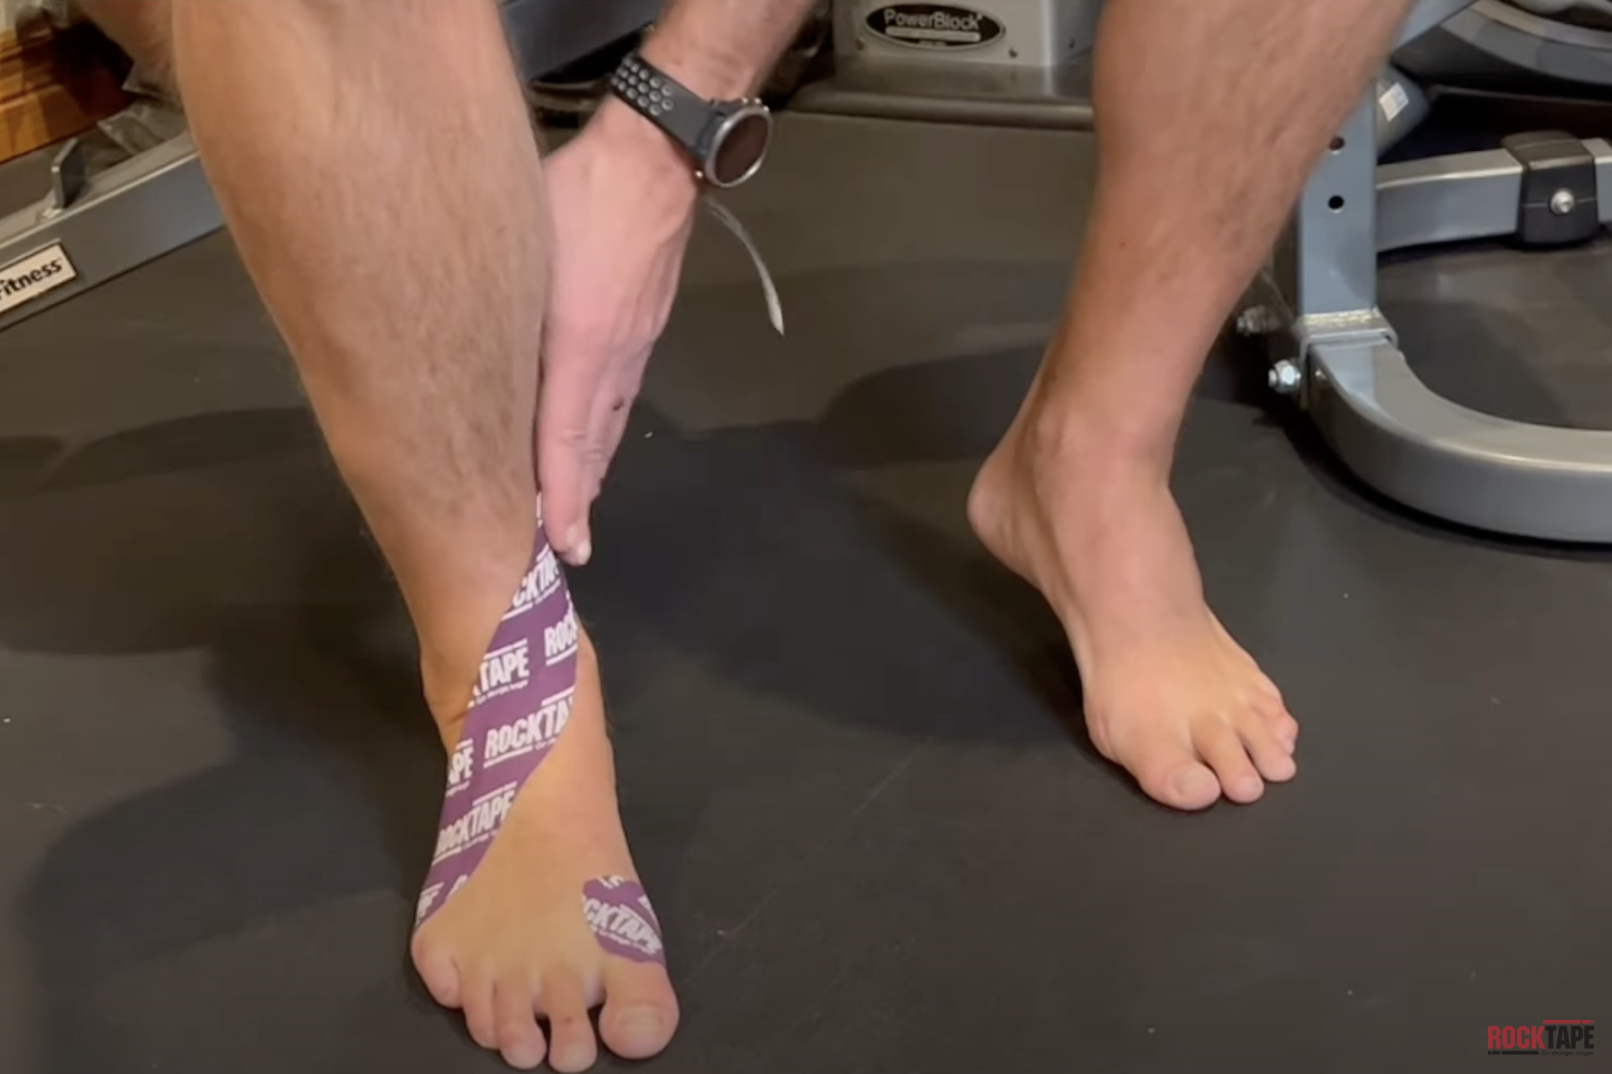 Don't Trip - Running With Drop Foot - RockTape